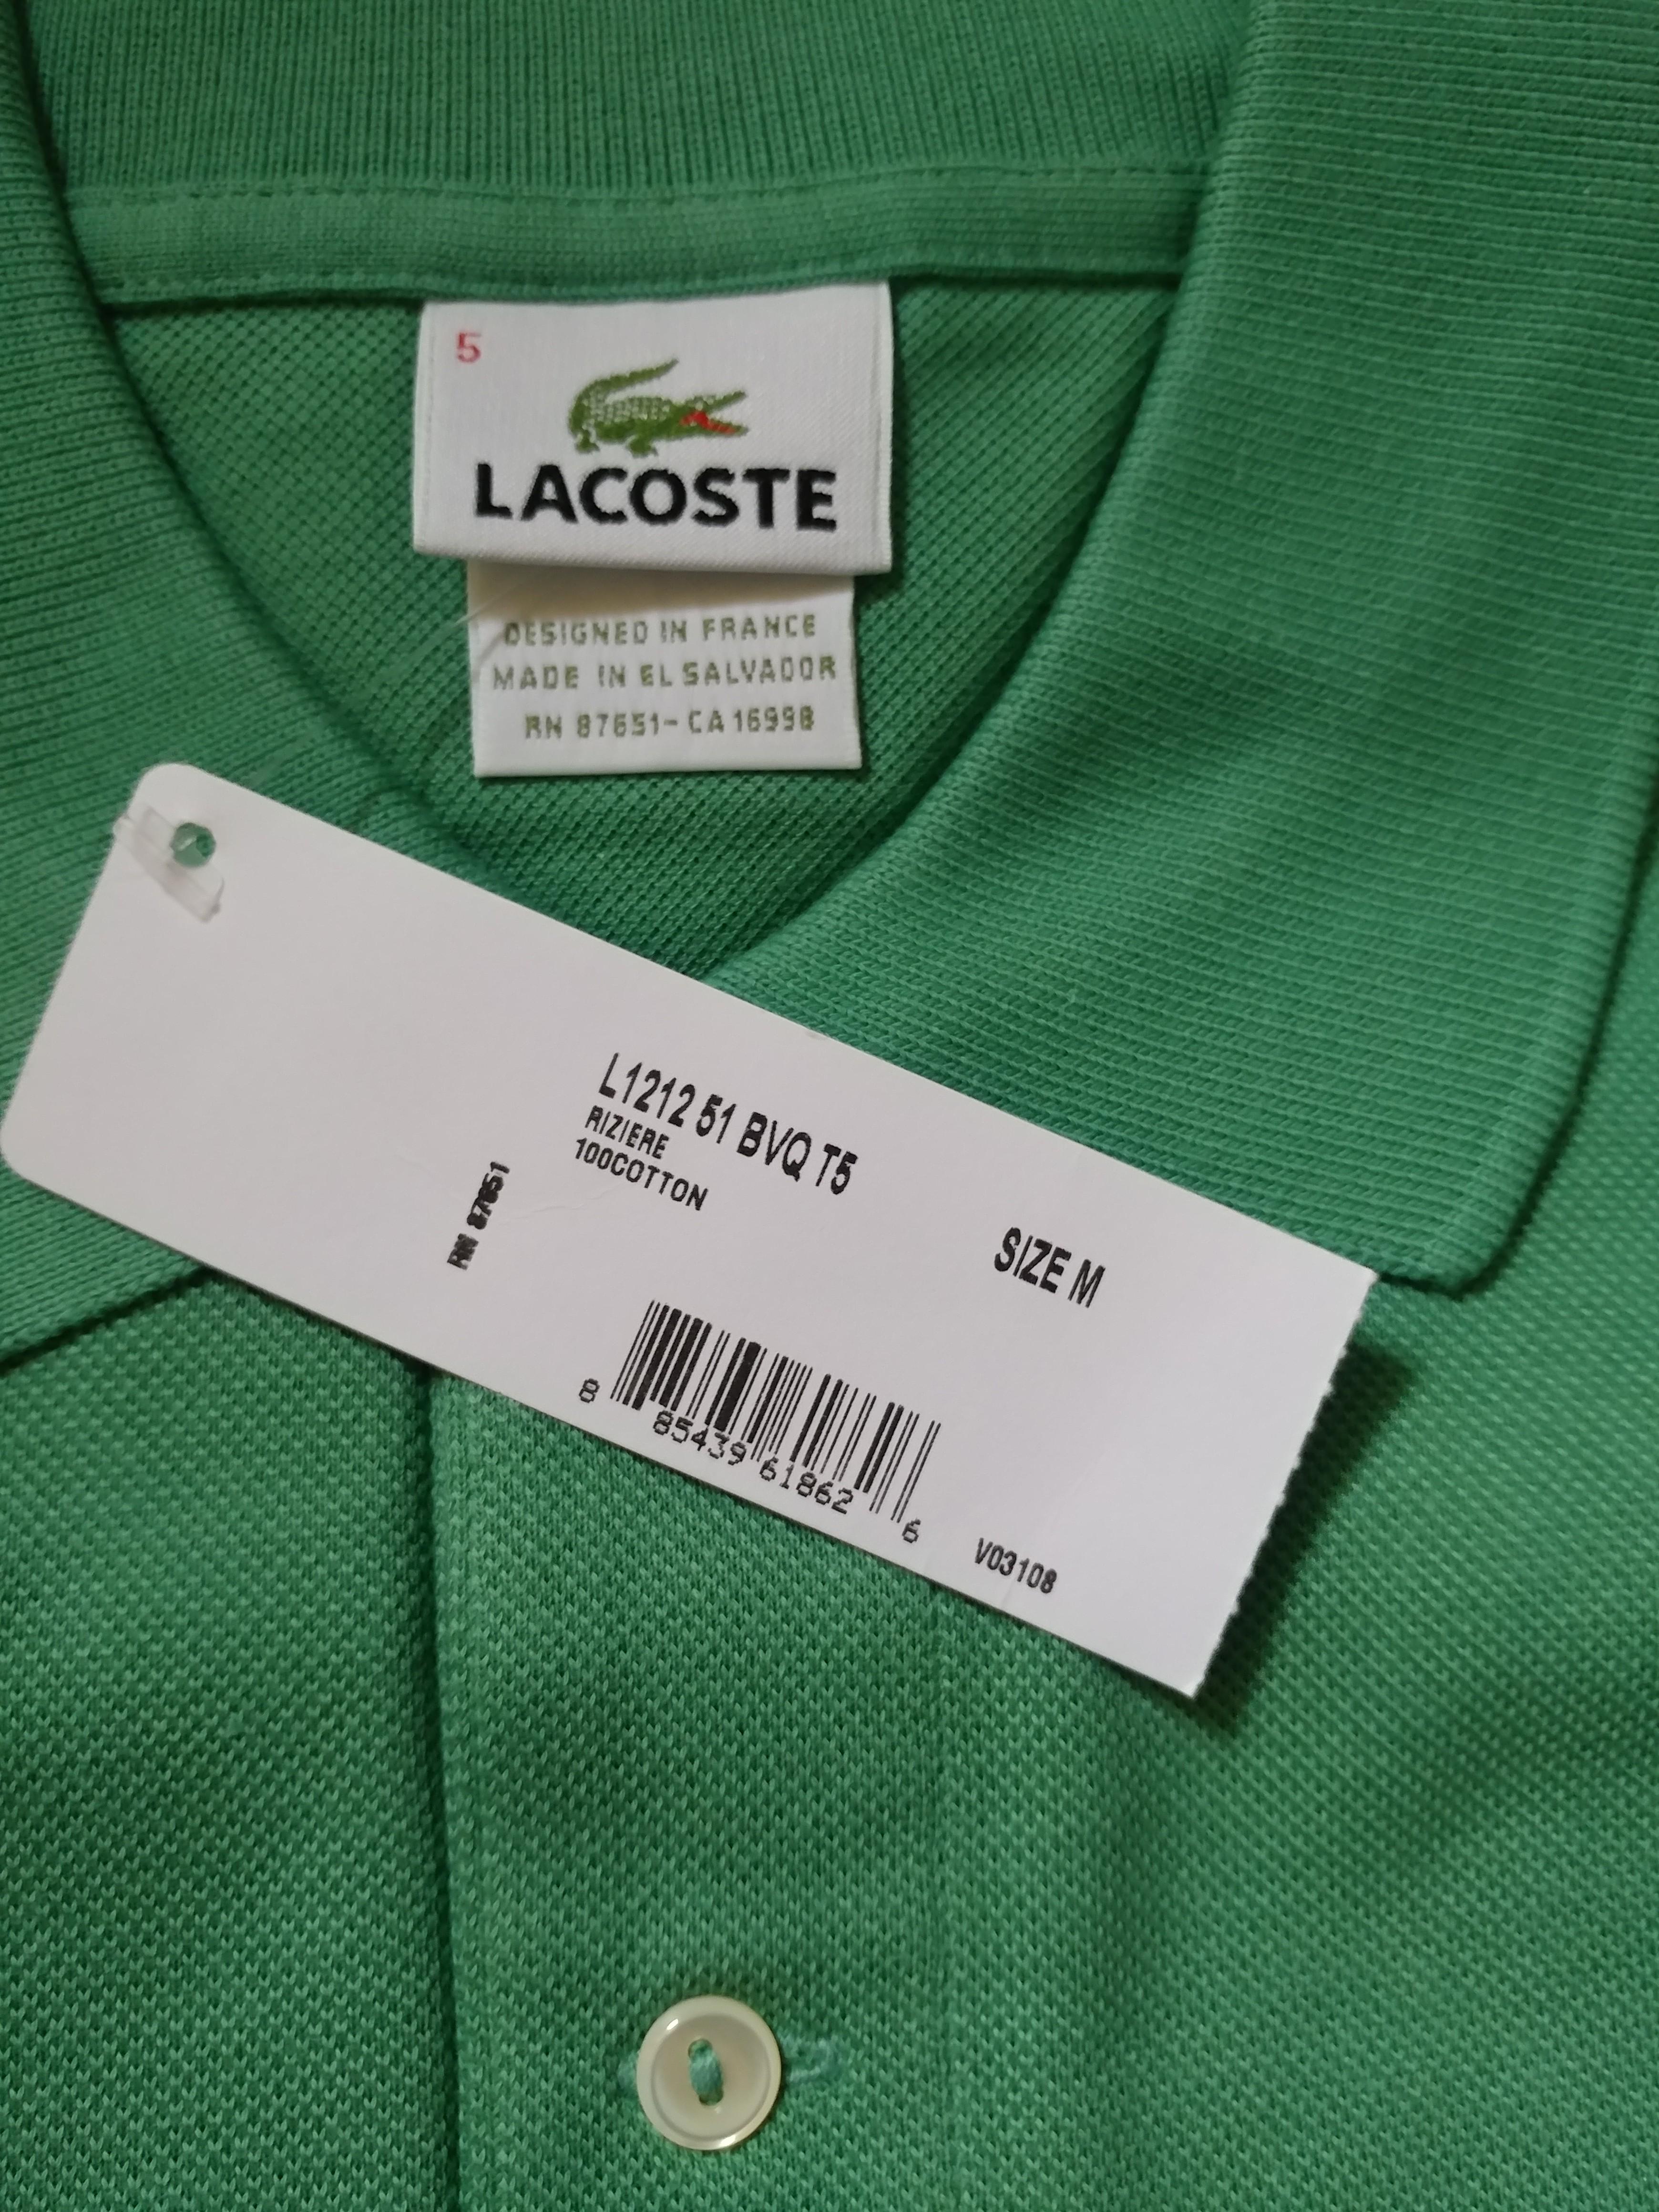 Lacoste Polo Shirt Size 5, Men's Fashion, Tops Sets, Tshirts & Polo Shirts on Carousell